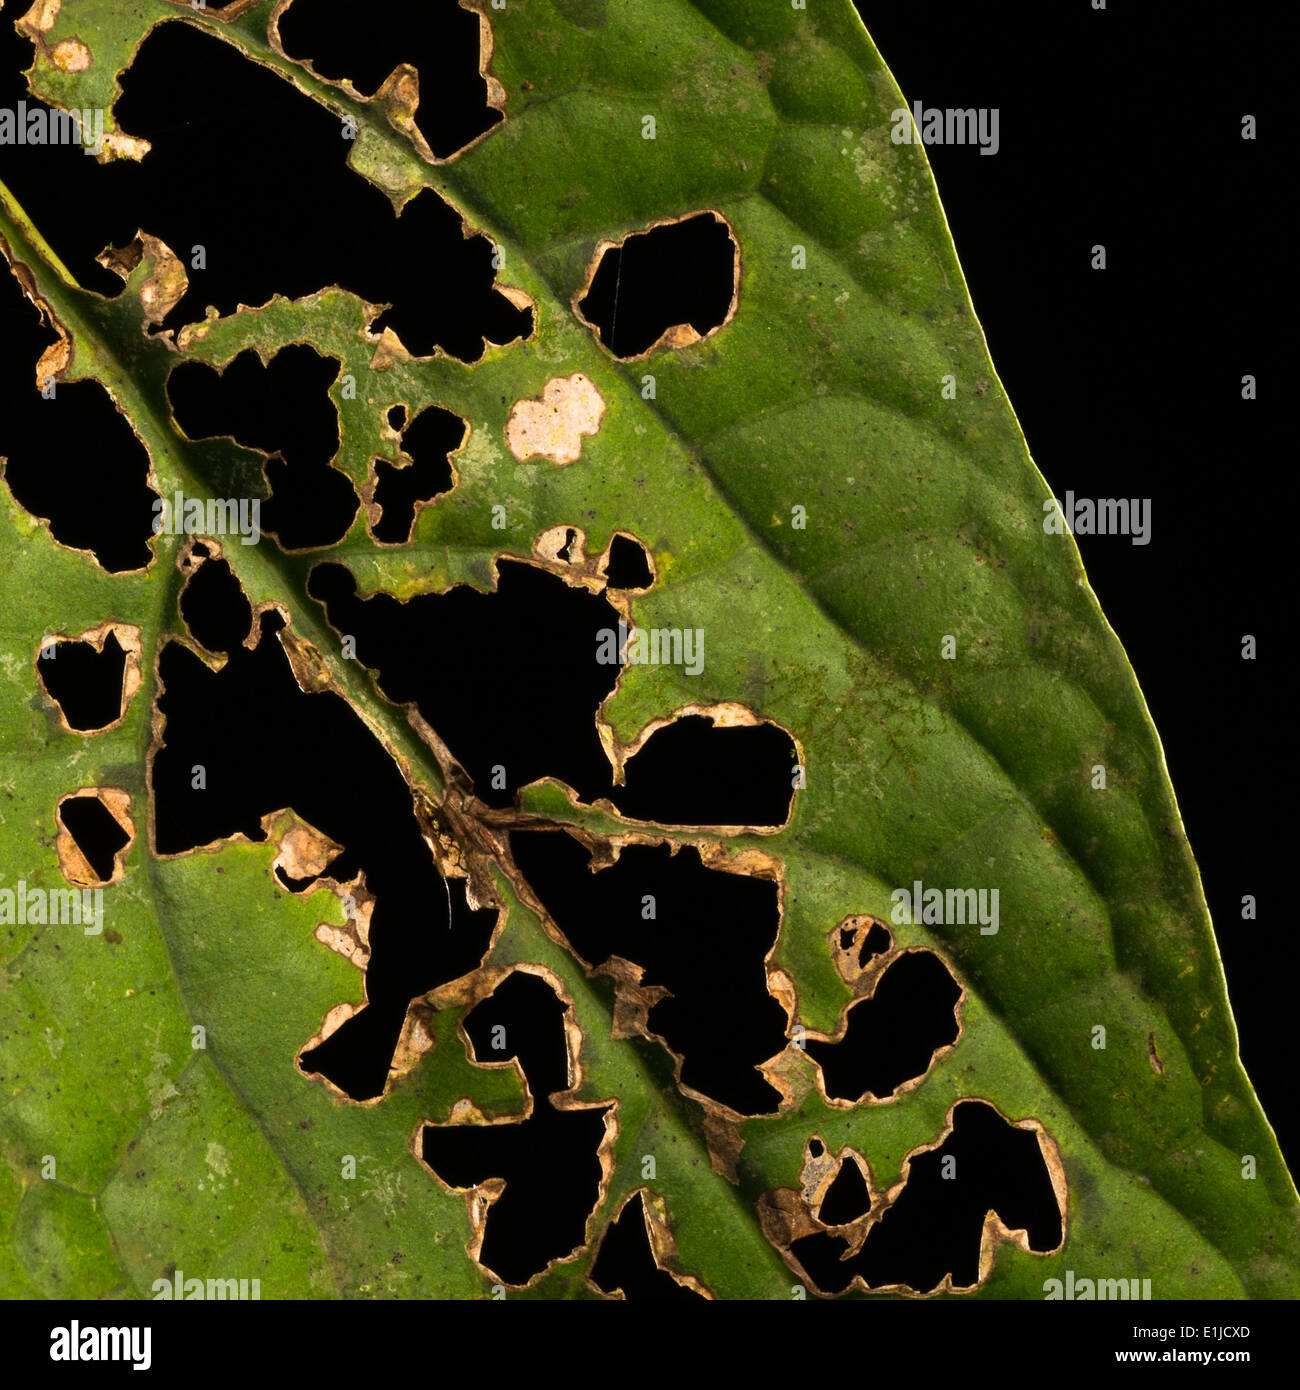 A green leaf damaged by insects Stock Photo